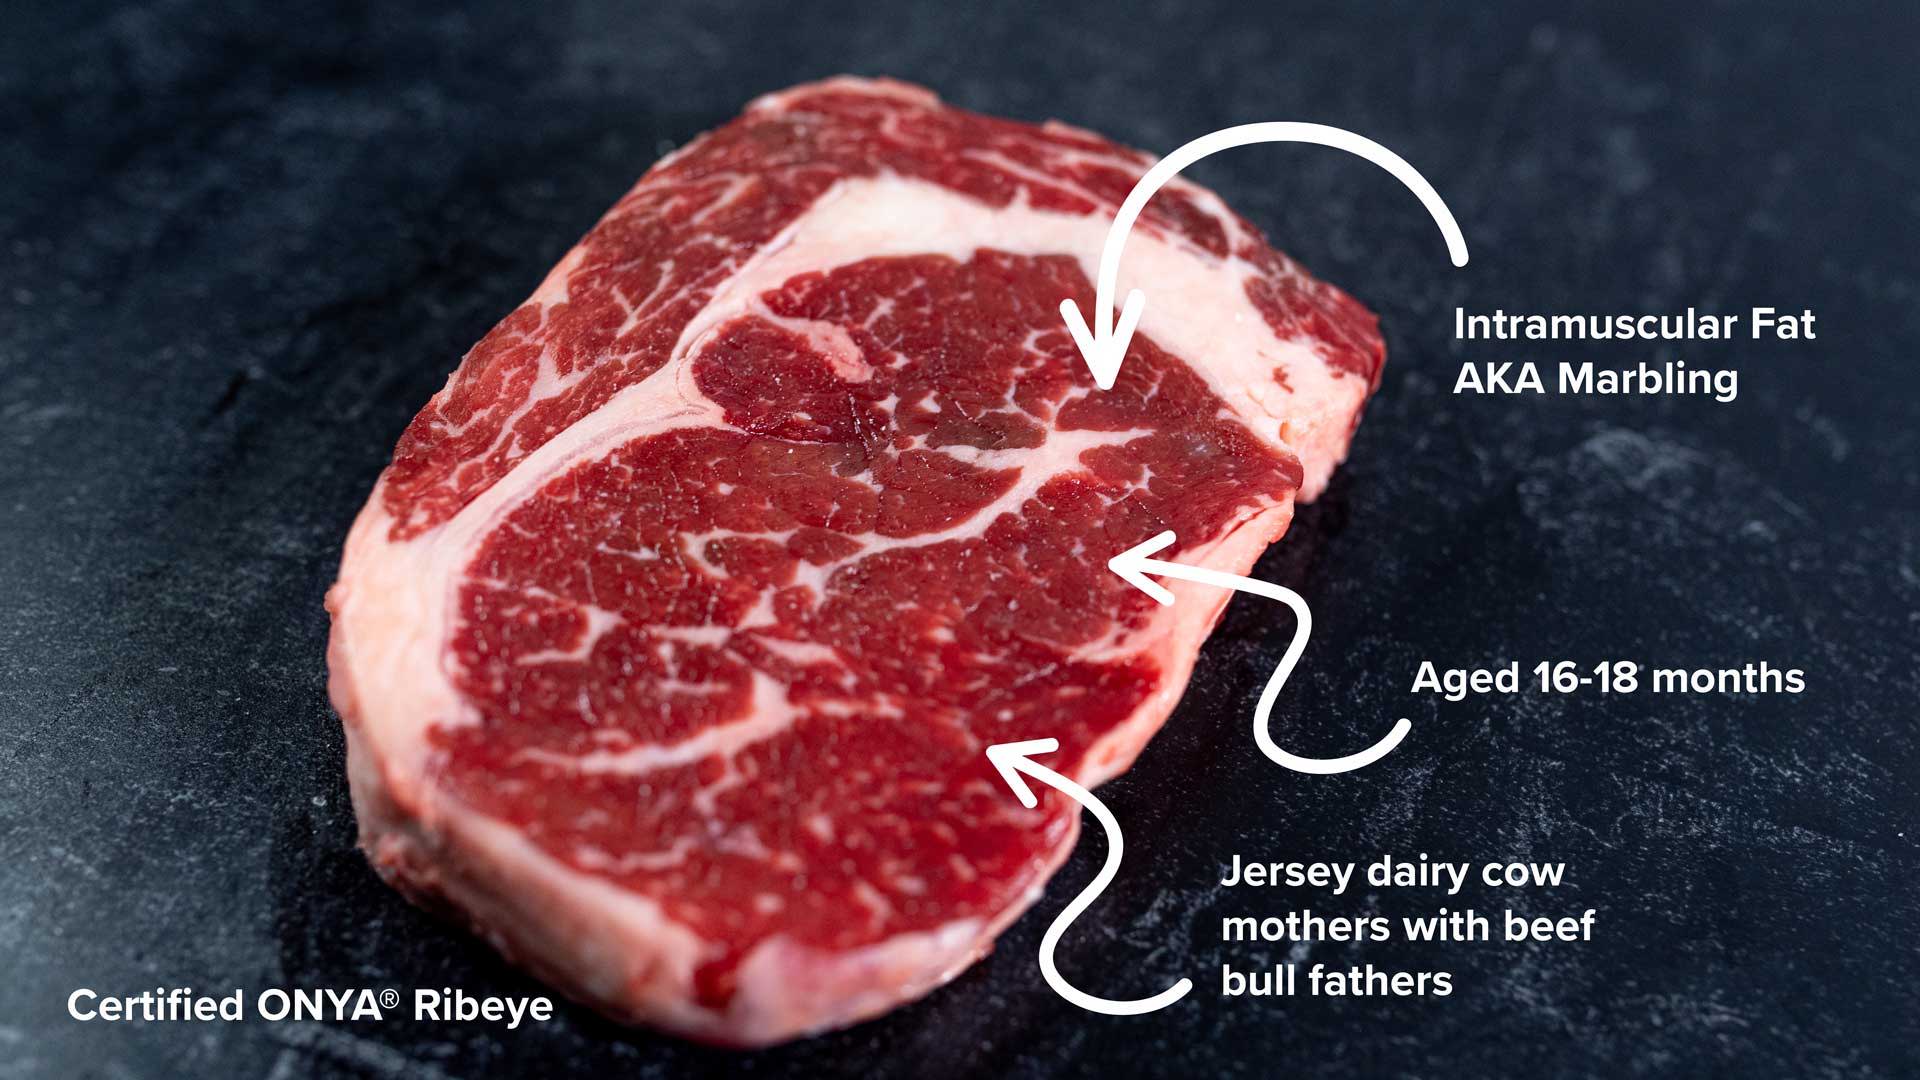 BetterFed Beef Certified ONYA® beef ribeye steak with better intramuscular fat AKA marbling. Every bit as tender as Wagyu at a fraction of the price